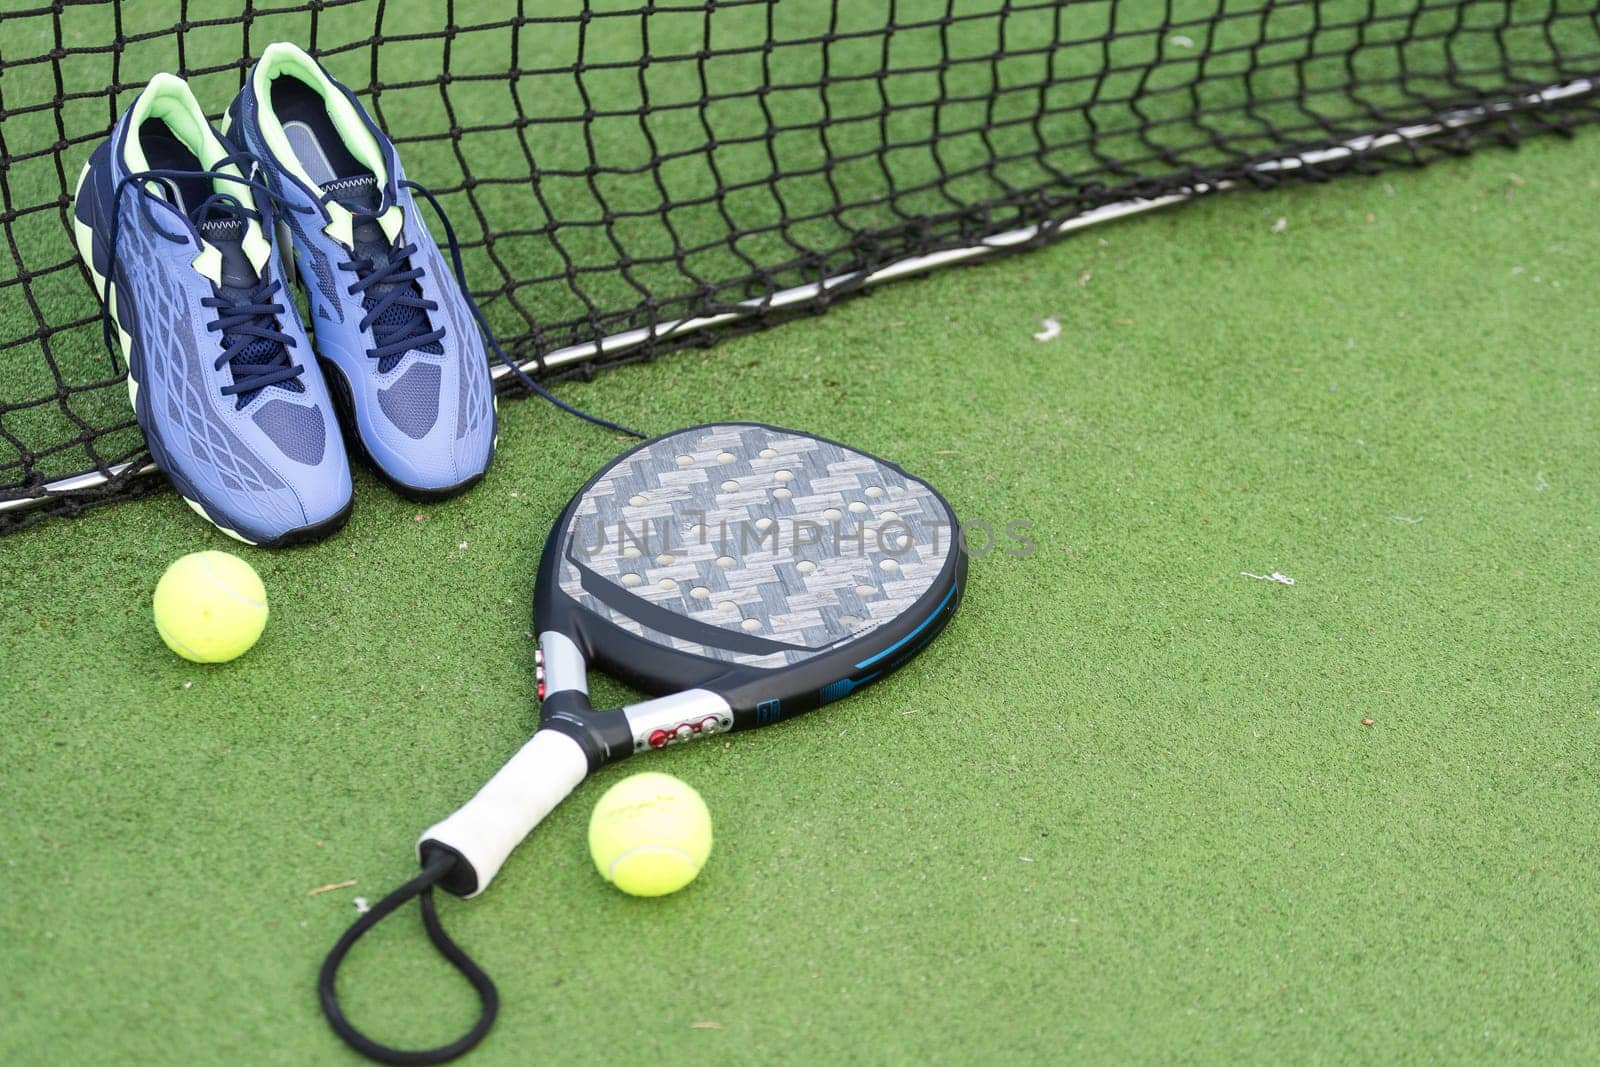 Paddle tennis objects and court. High quality photo